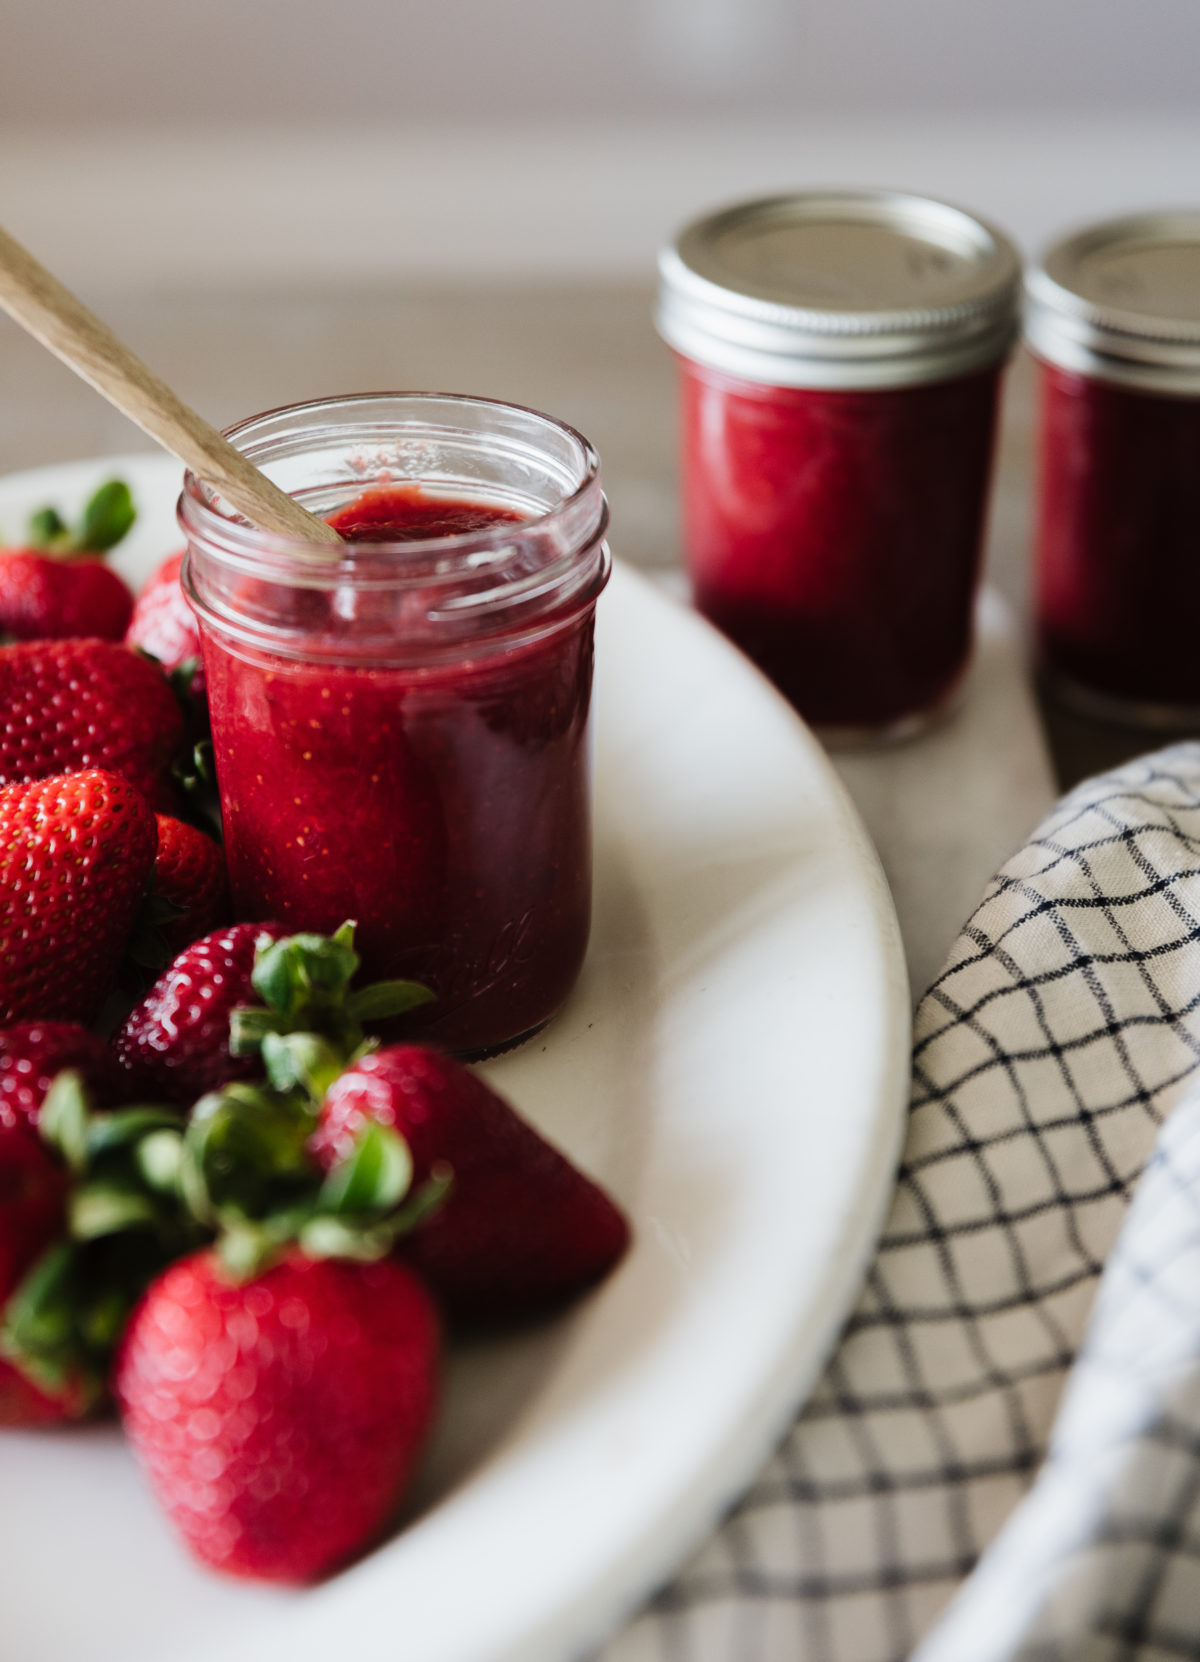 glass mason jar filled with strawberry honey butter with a wooden spoon sticking out of it on a white oval platter surrounded by fresh strawberries in the foreground and two closed jars of strawberry honey butter in the background.